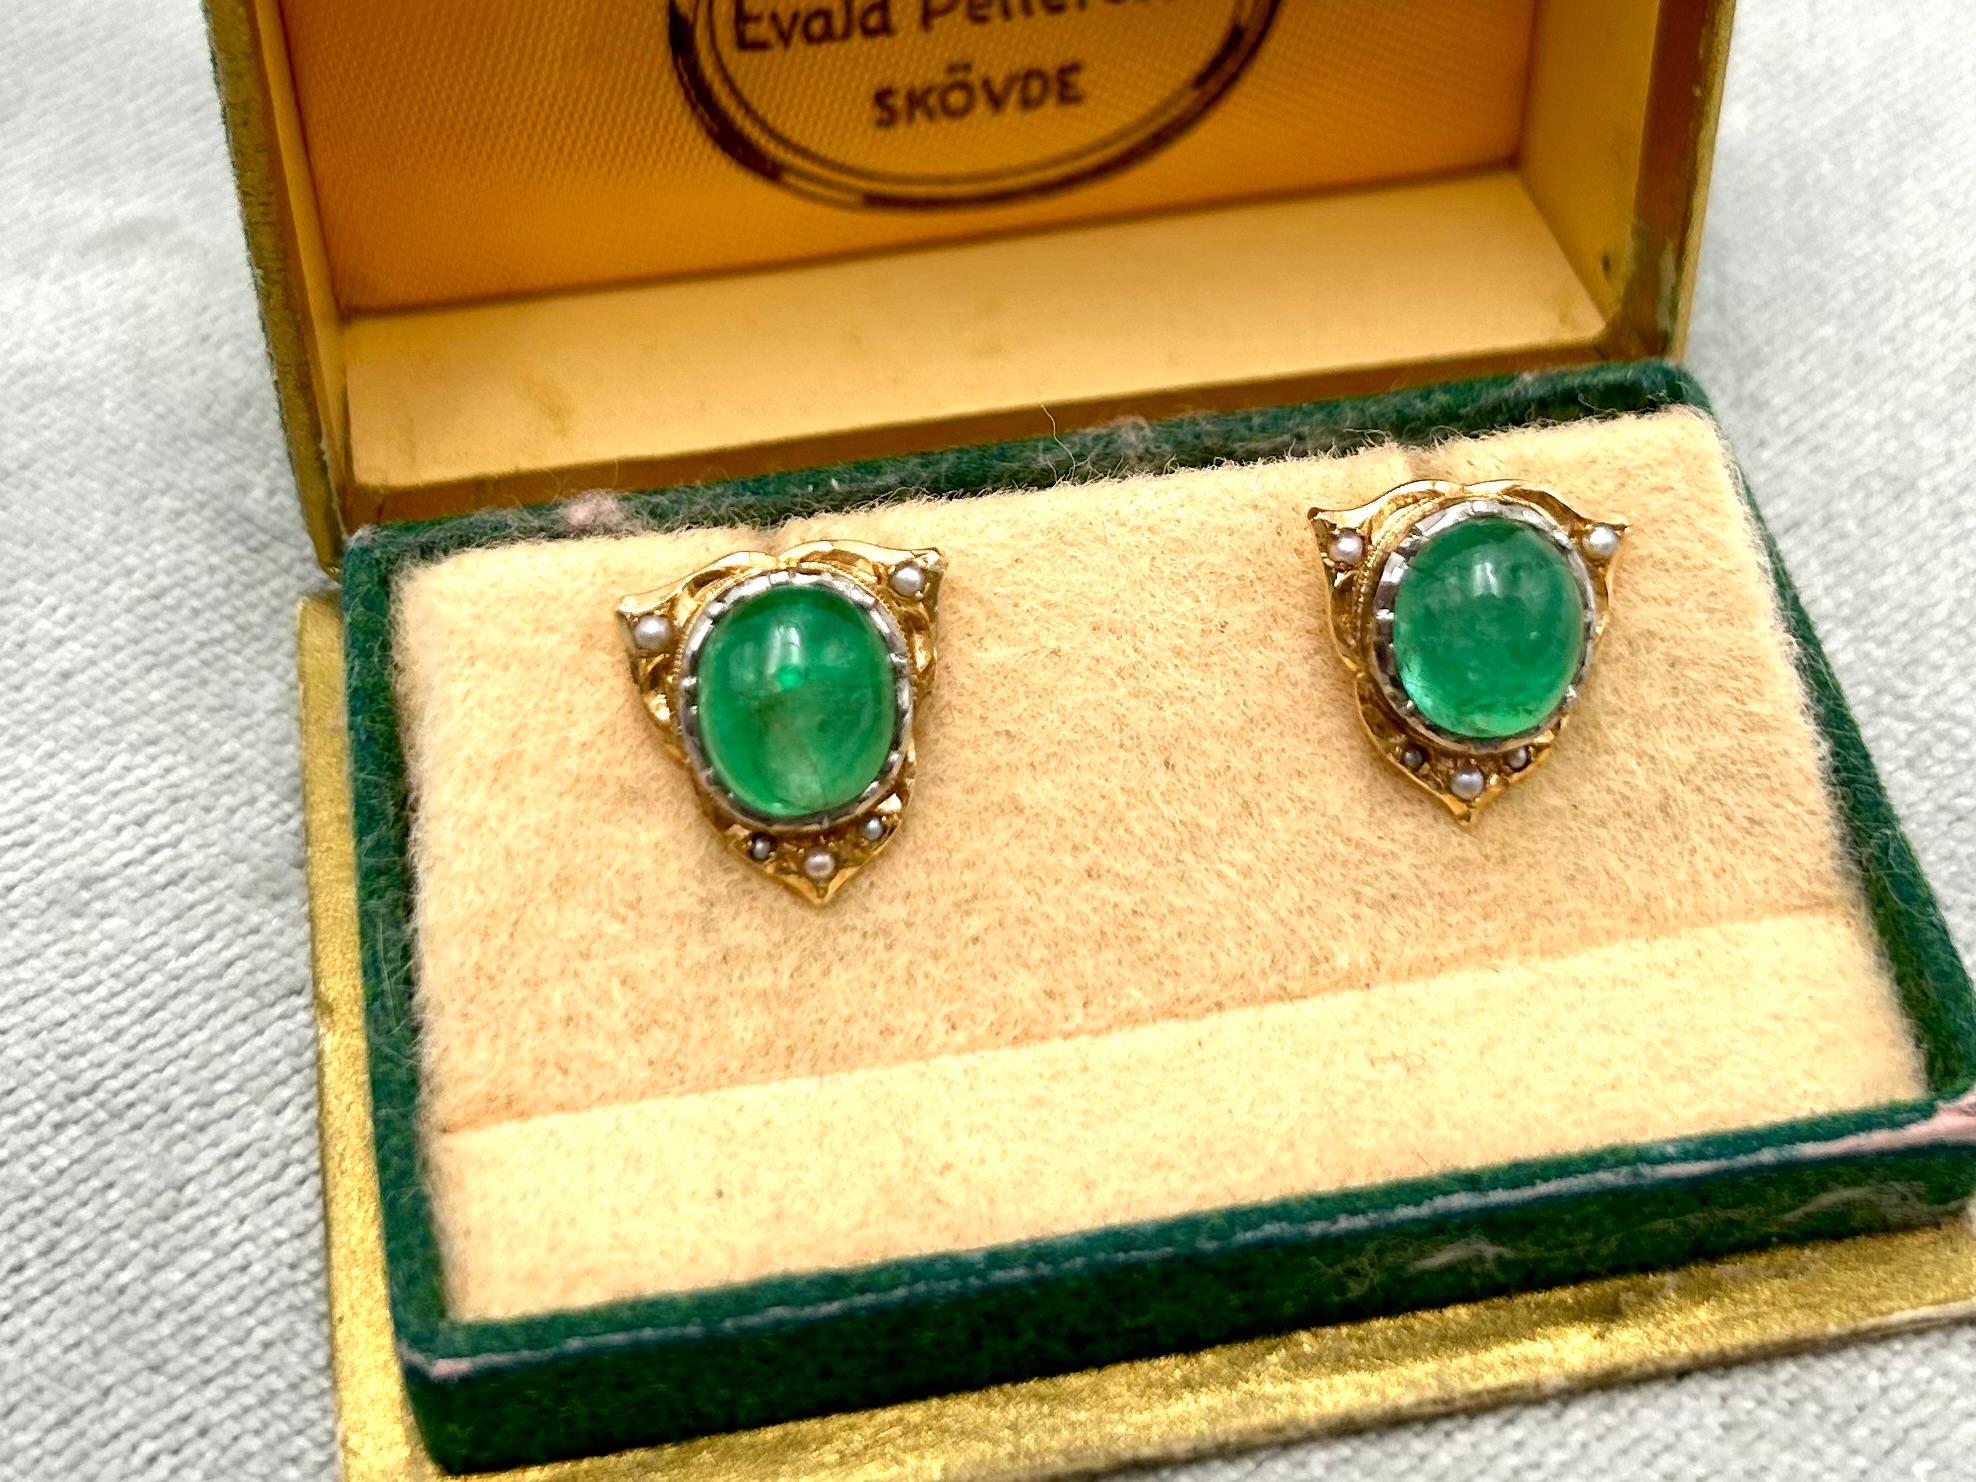 Gold earrings with emeralds and pearls. Made of 0.750 yellow gold and 2 oval cabochon-cut emeralds of a total weight of approx. 3.2 ct; surrounded by 10 natural small pearls. The earrings have an old-style clasp for tightening to the earlobe.